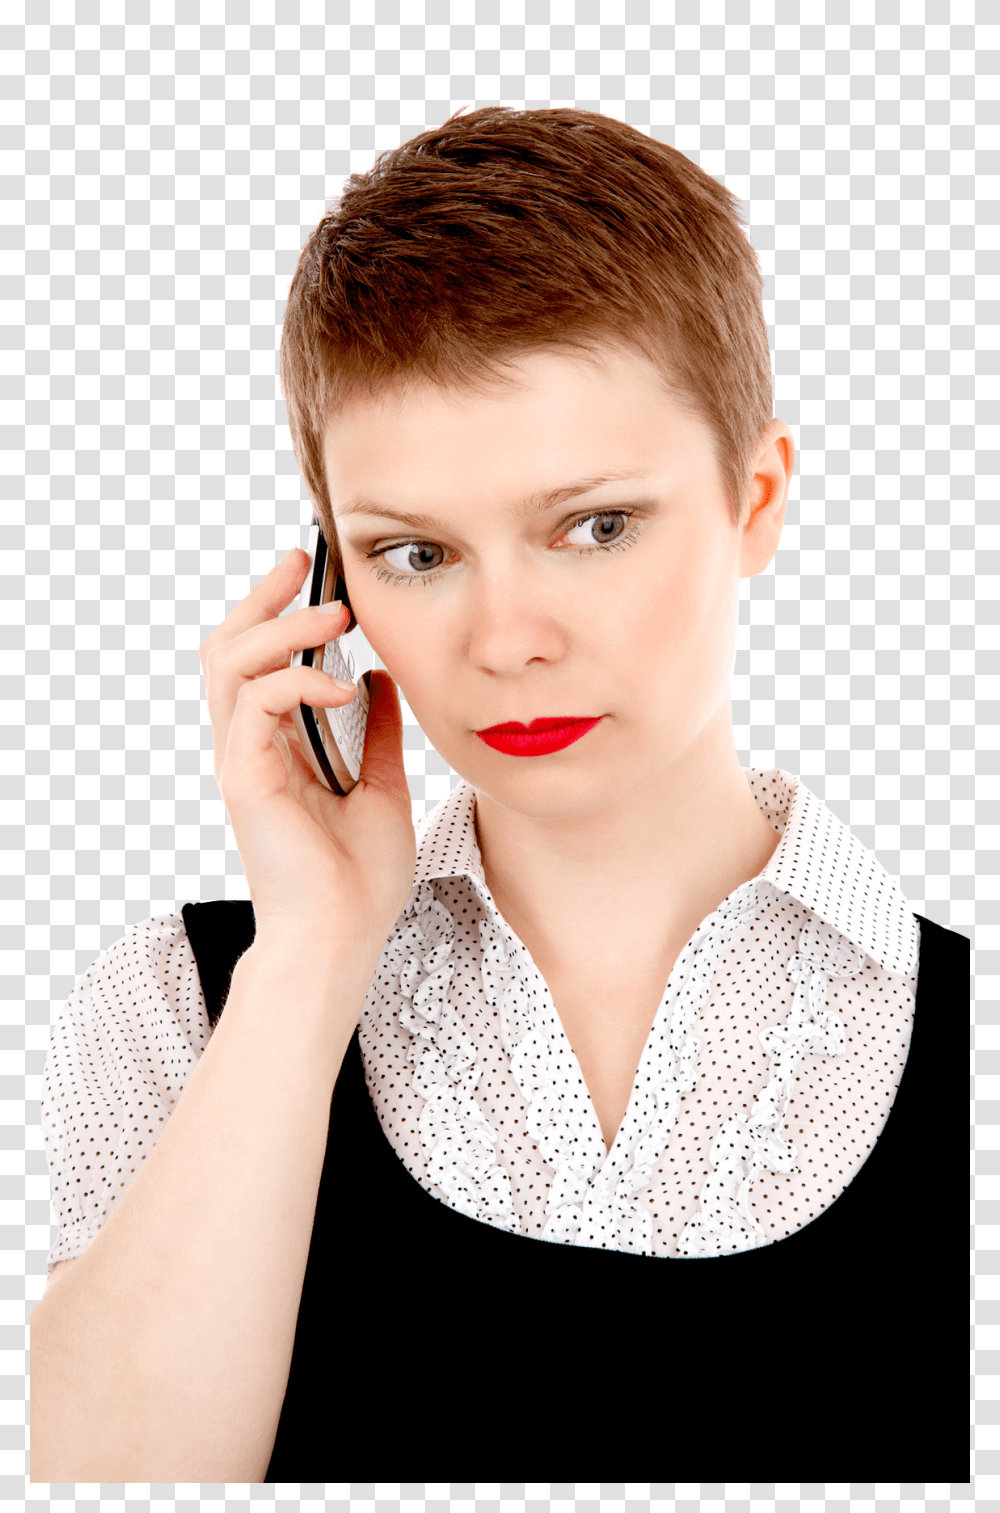 Business Woman On Mobile Phone Image, Person, Face, Cosmetics, Lipstick Transparent Png